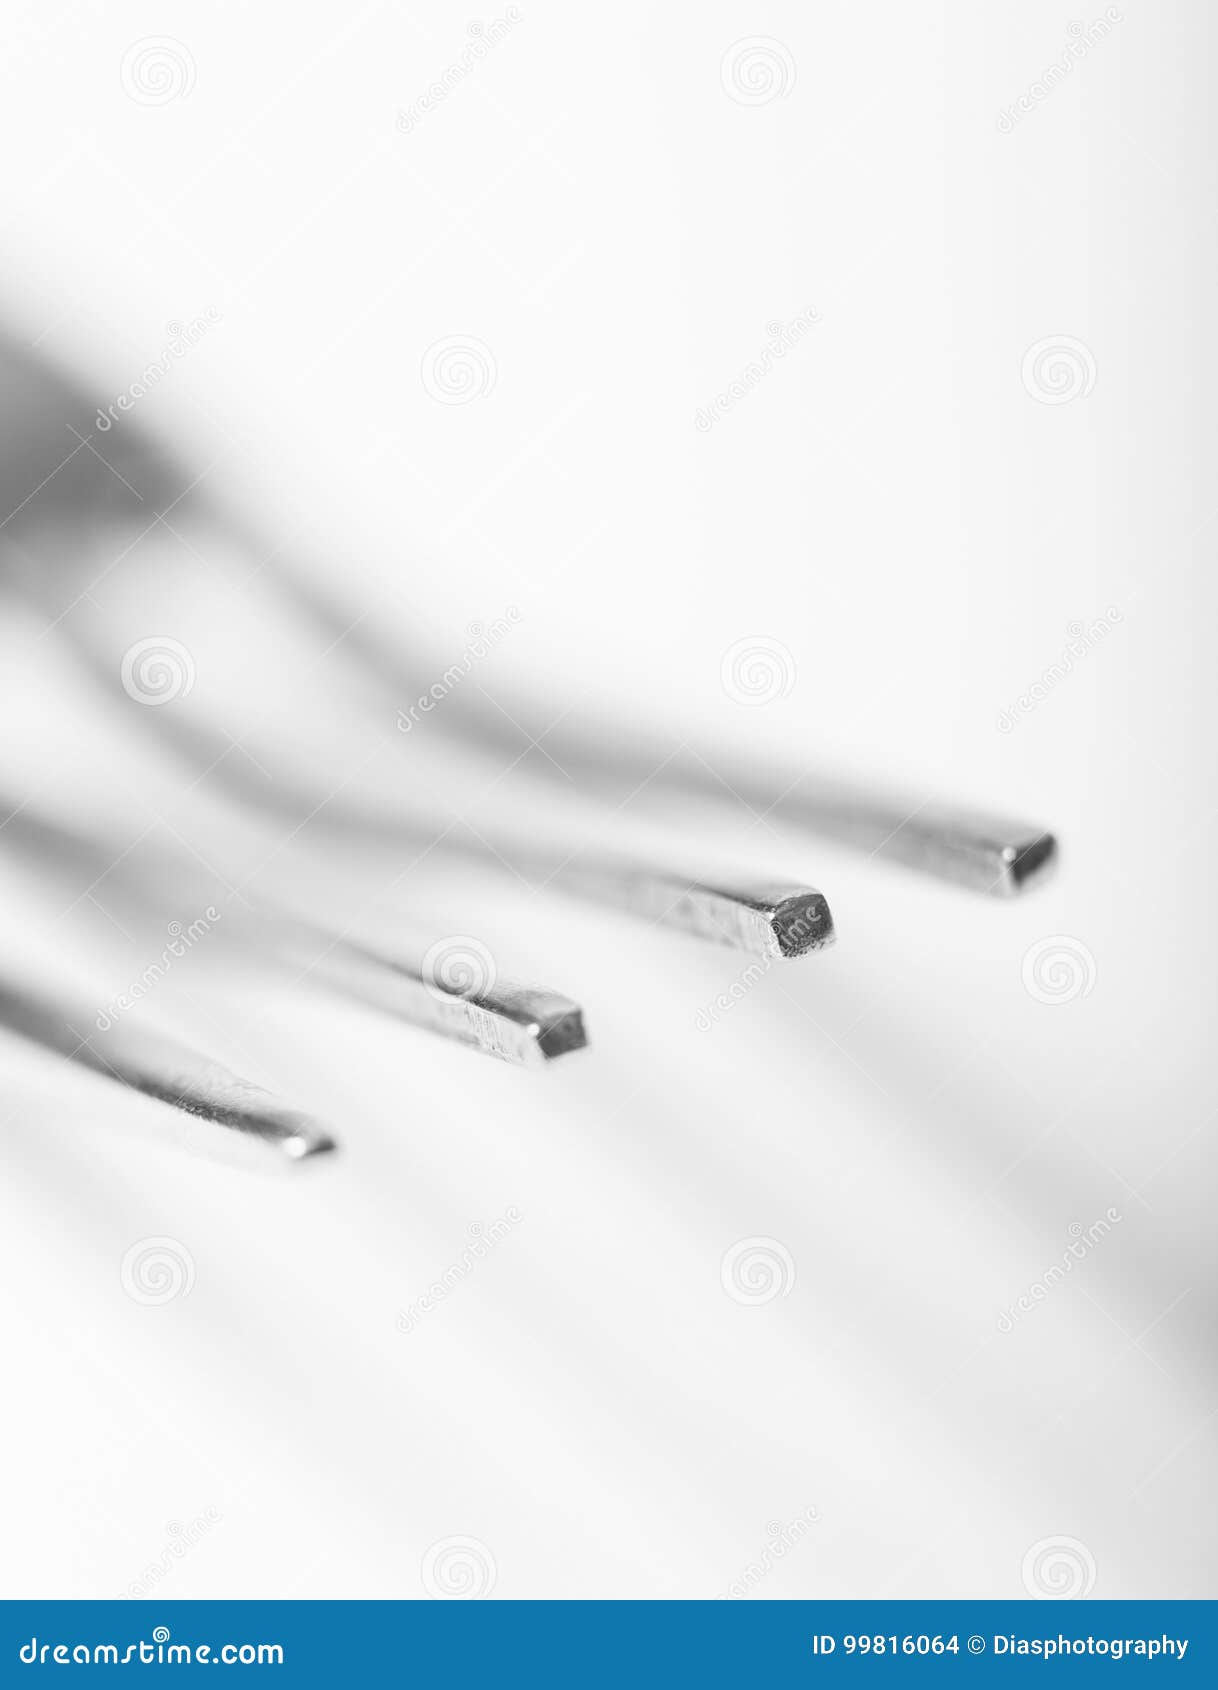 A Fork on a White Background Stock Photo - Image of regular, tool: 99816064